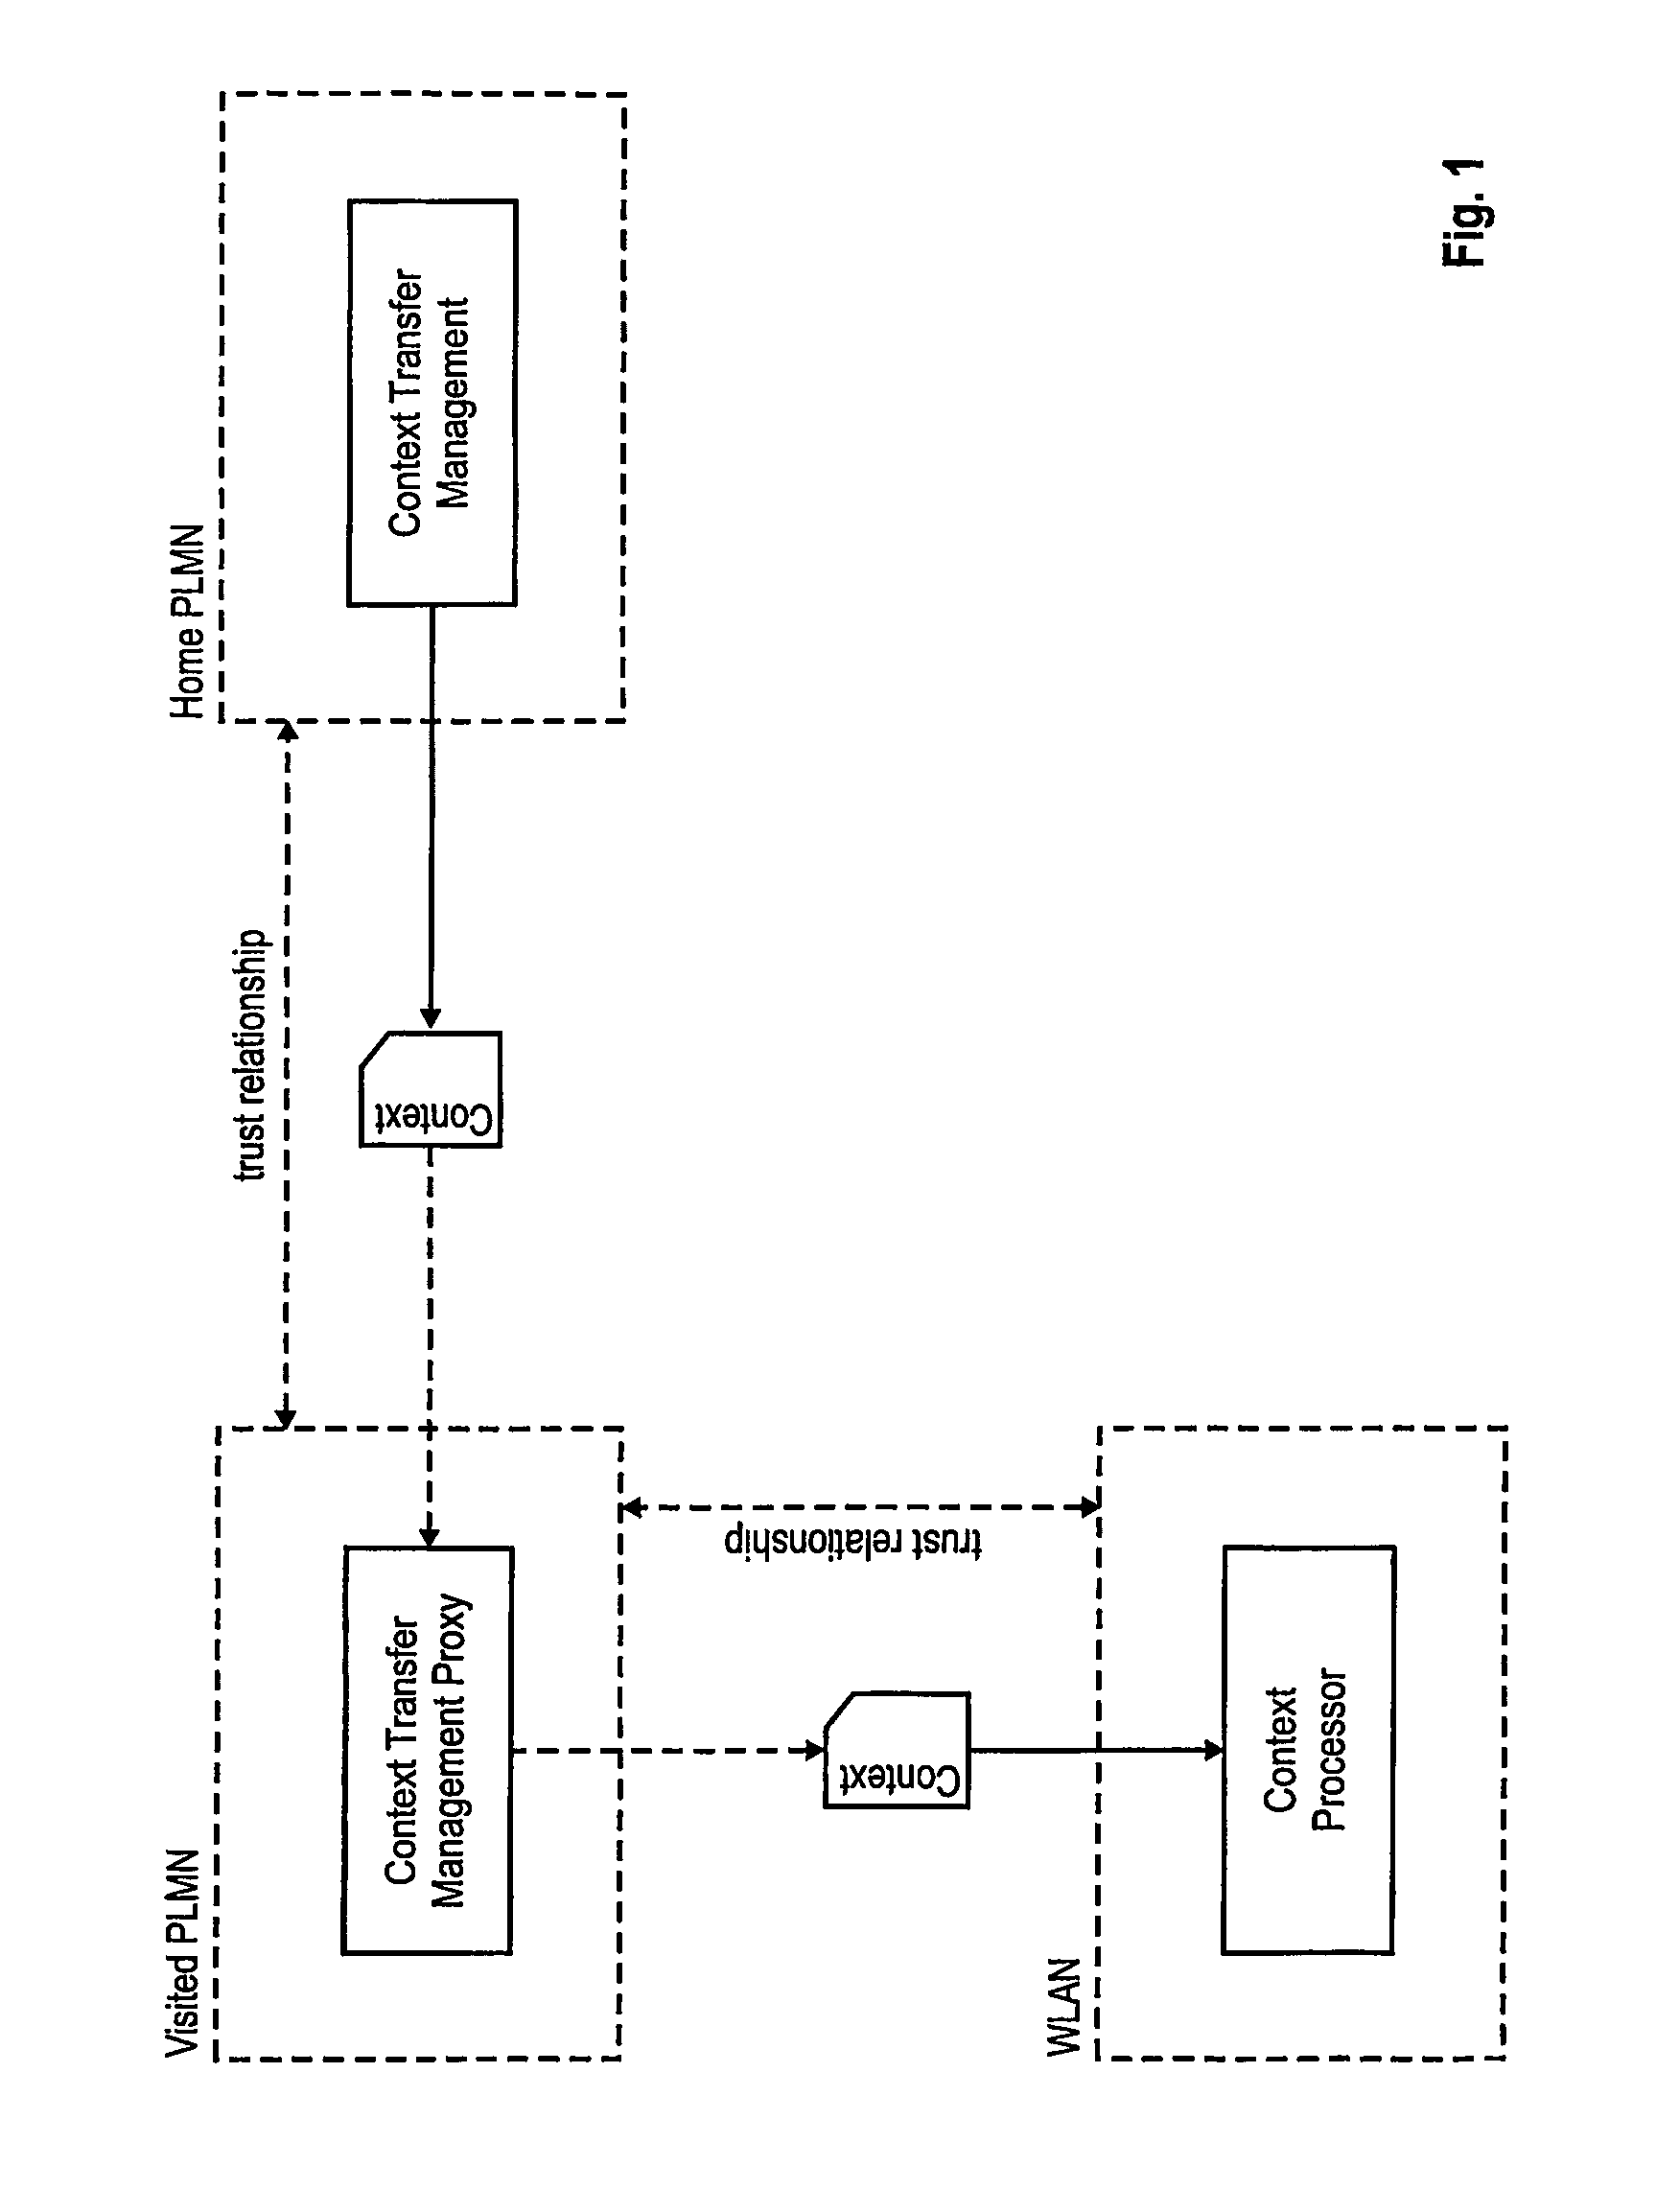 Context transfer in a communication network comprising plural heterogeneous access networks